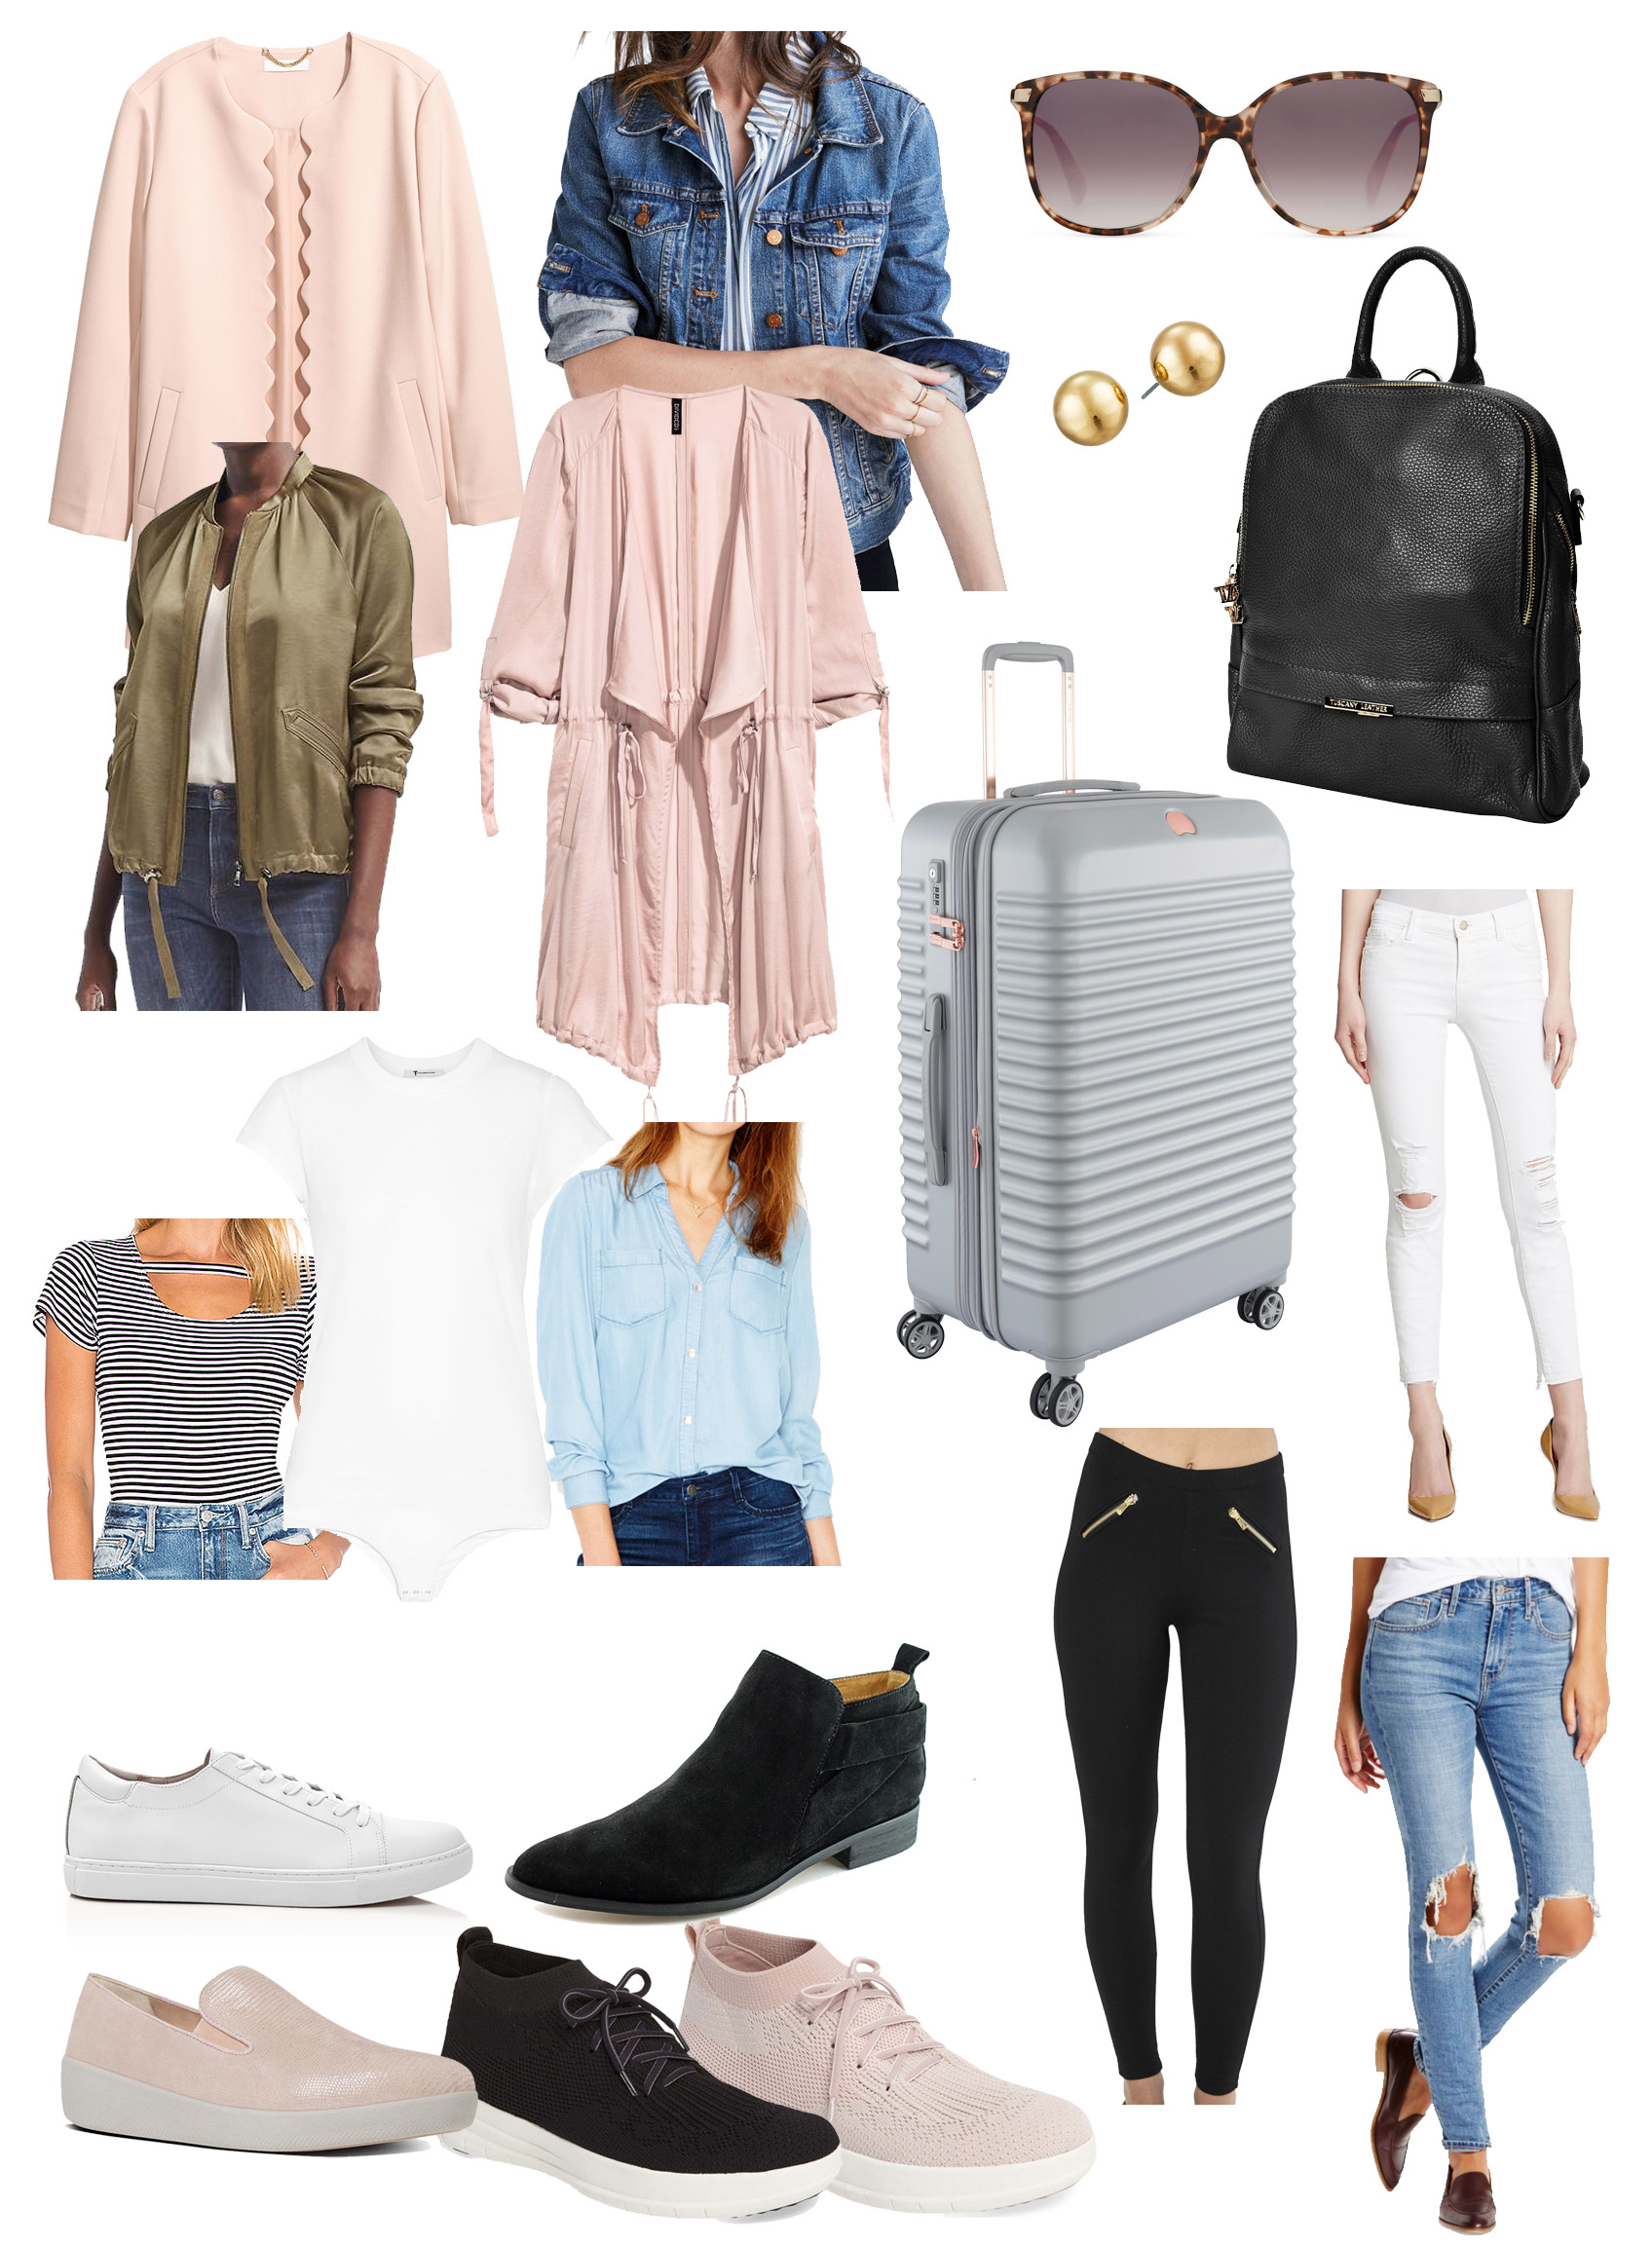 blush scalloped jacket from h&m blush blues and blacks packing for Prague ideas